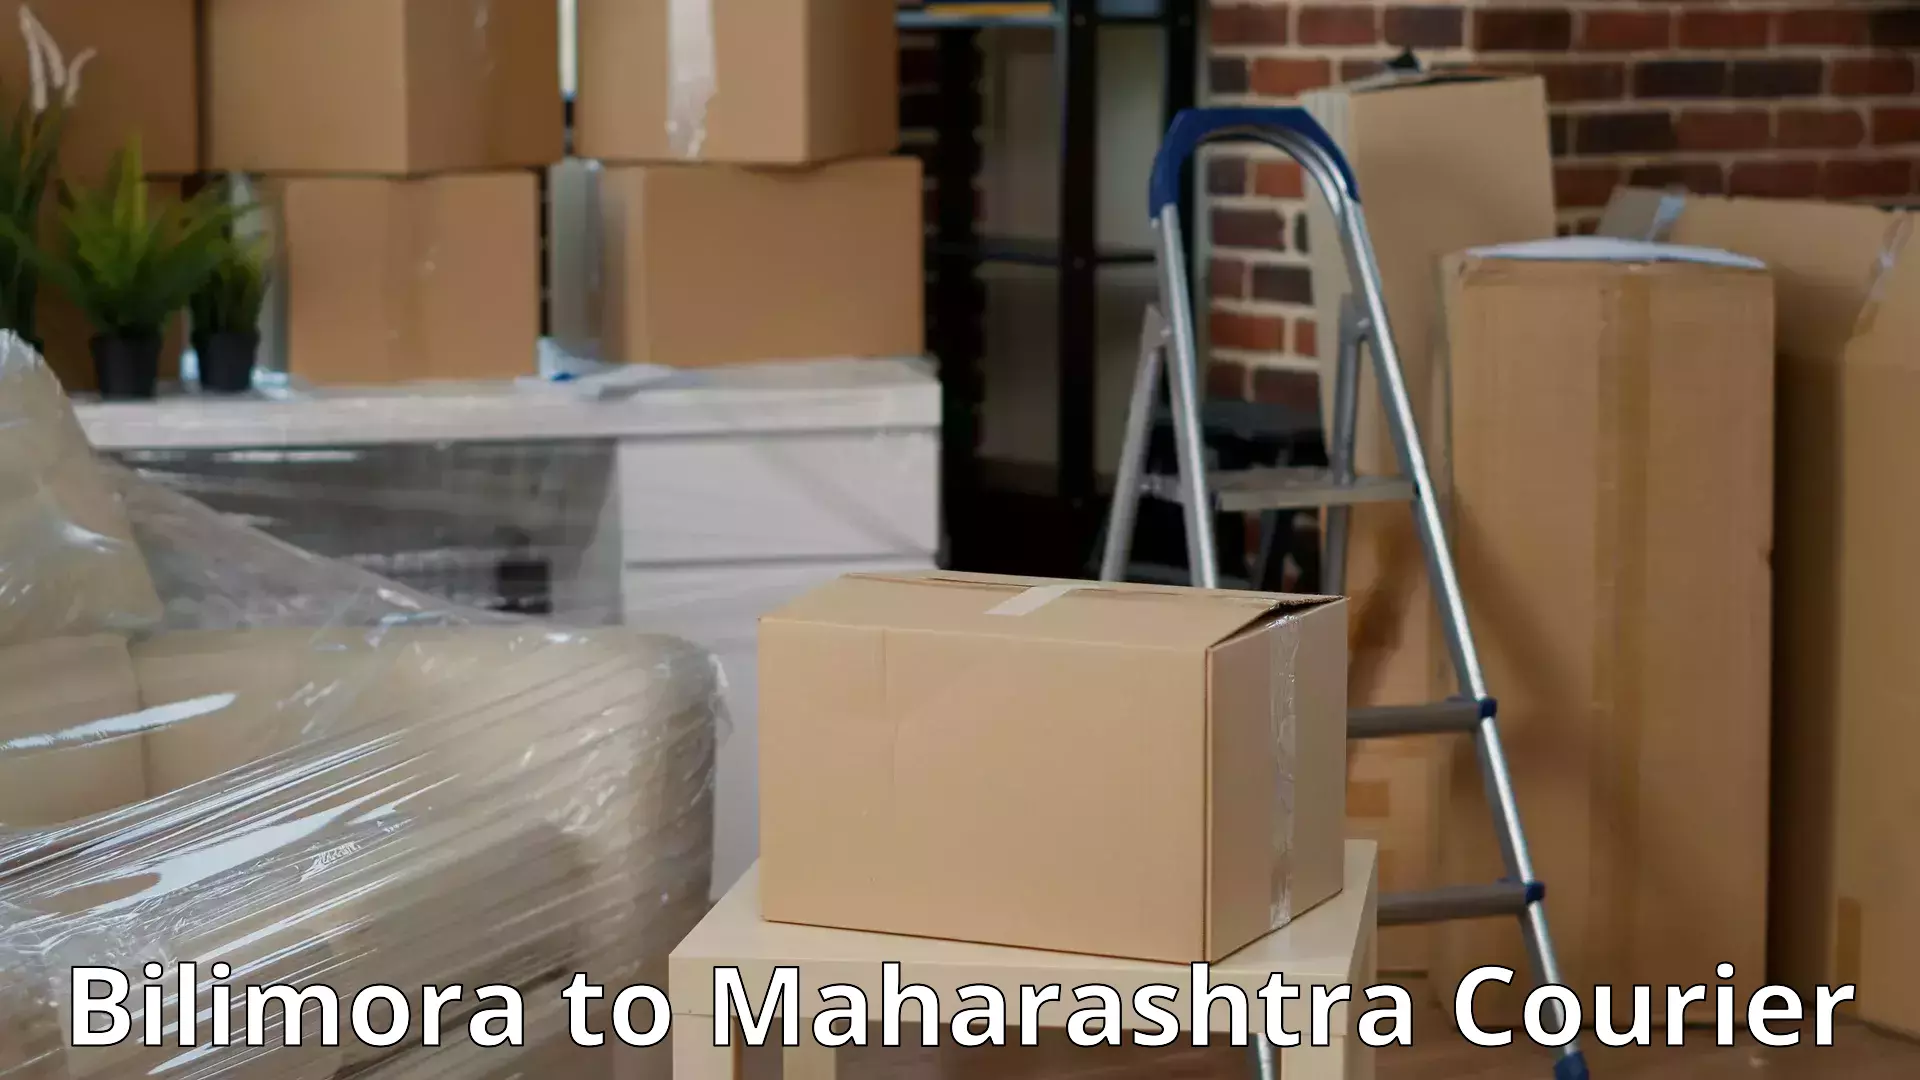 Reliable moving assistance in Bilimora to Ratnagiri